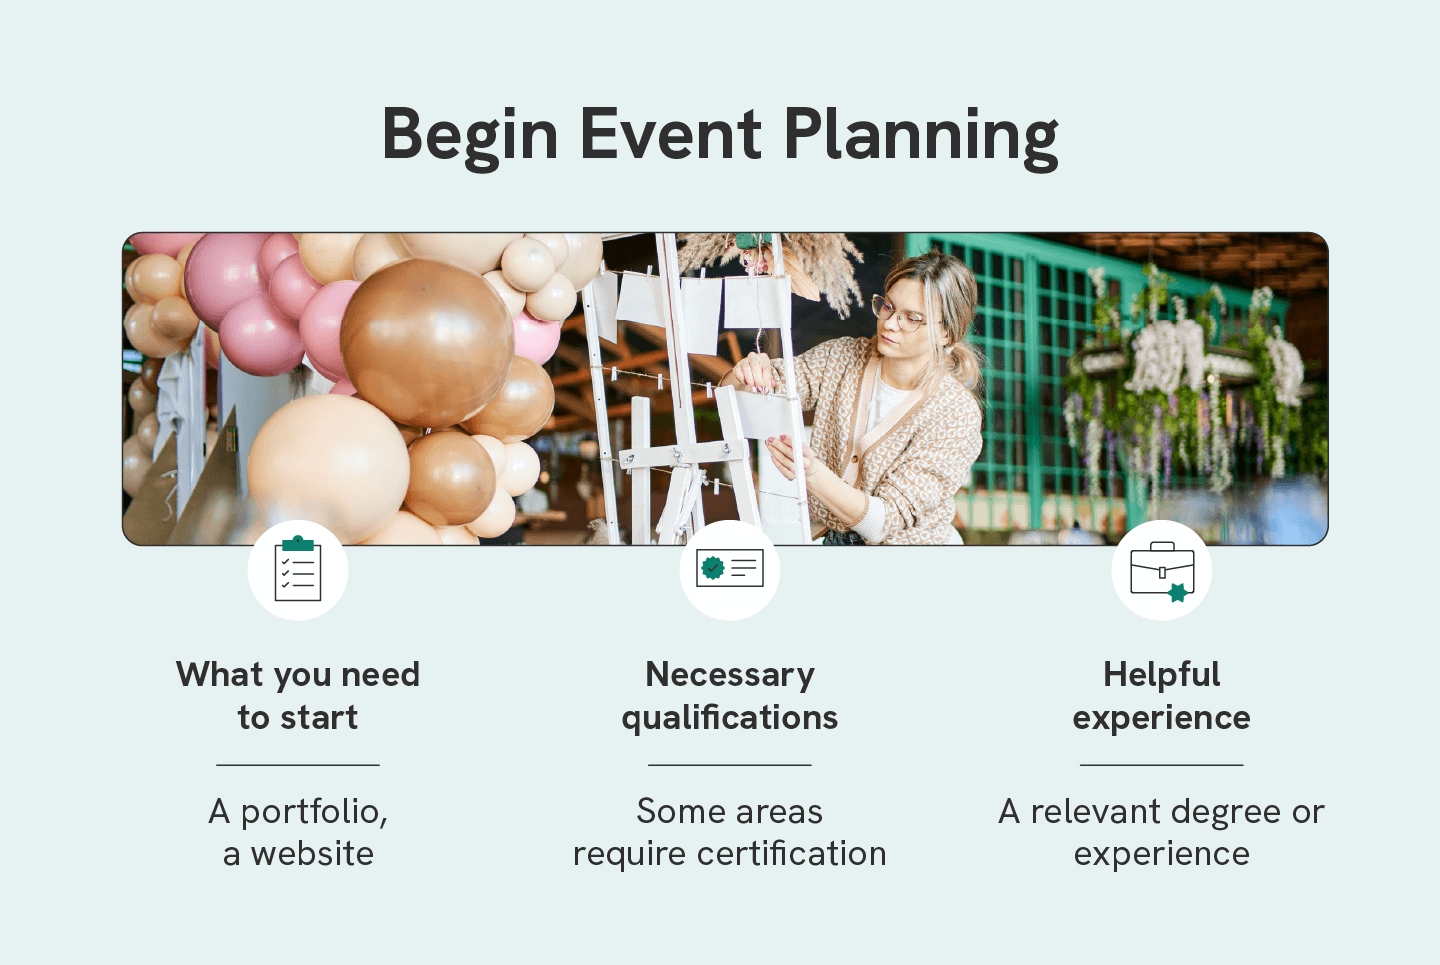 Photograph of an event planner preparing an event with clipboard, certification, and briefcase icons and text covering what is needed to get started with this small business idea. 